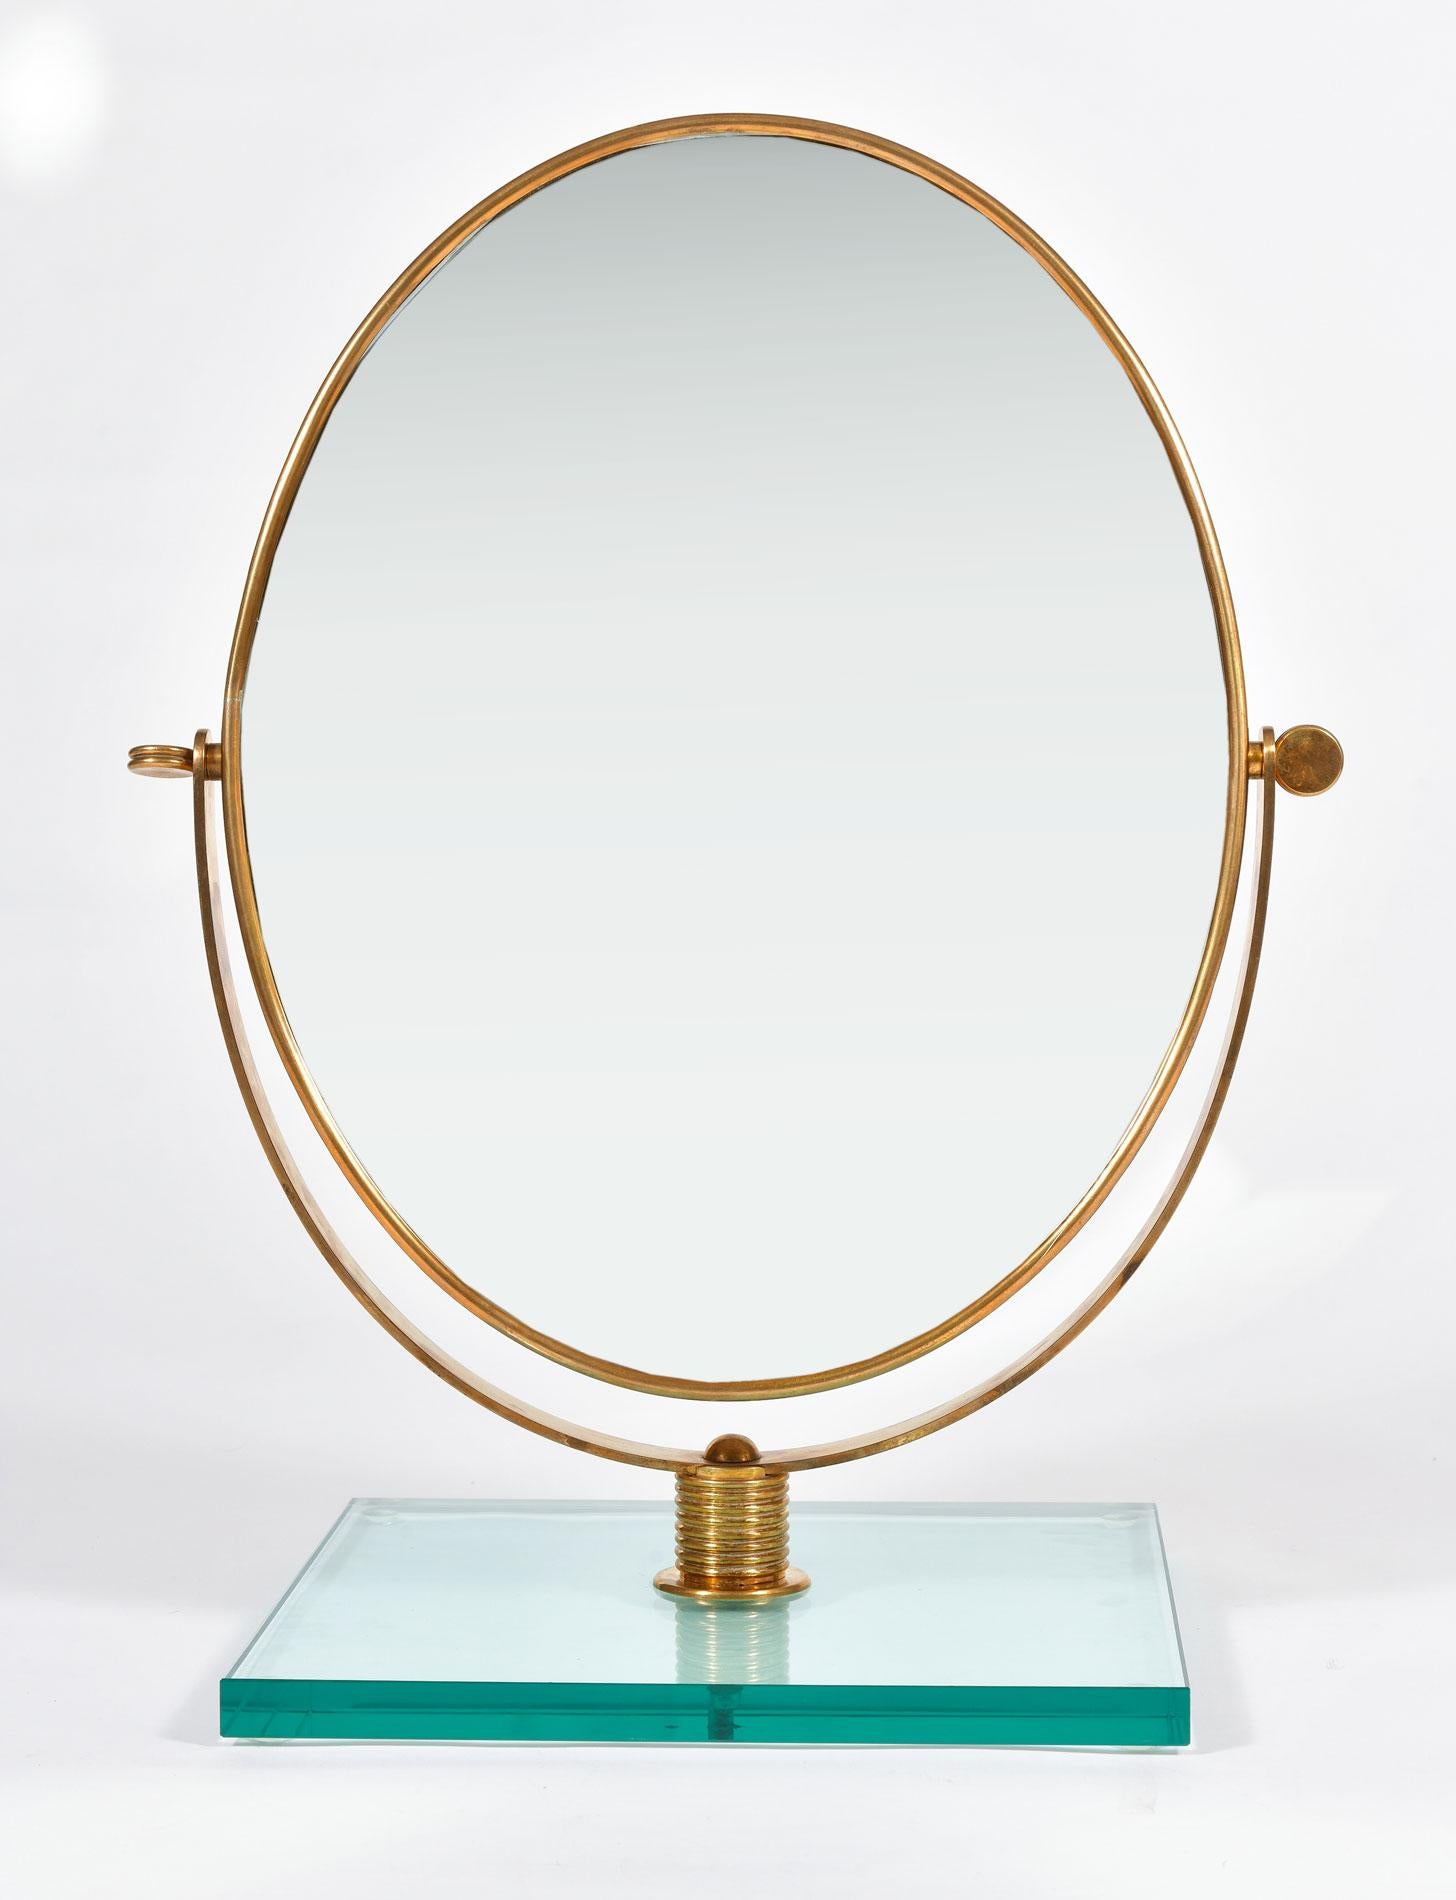 Chic brass framed table mirror angled within decorative brass support which allows the mirror to be re-positioned as required. Sits on thick square green glass base.